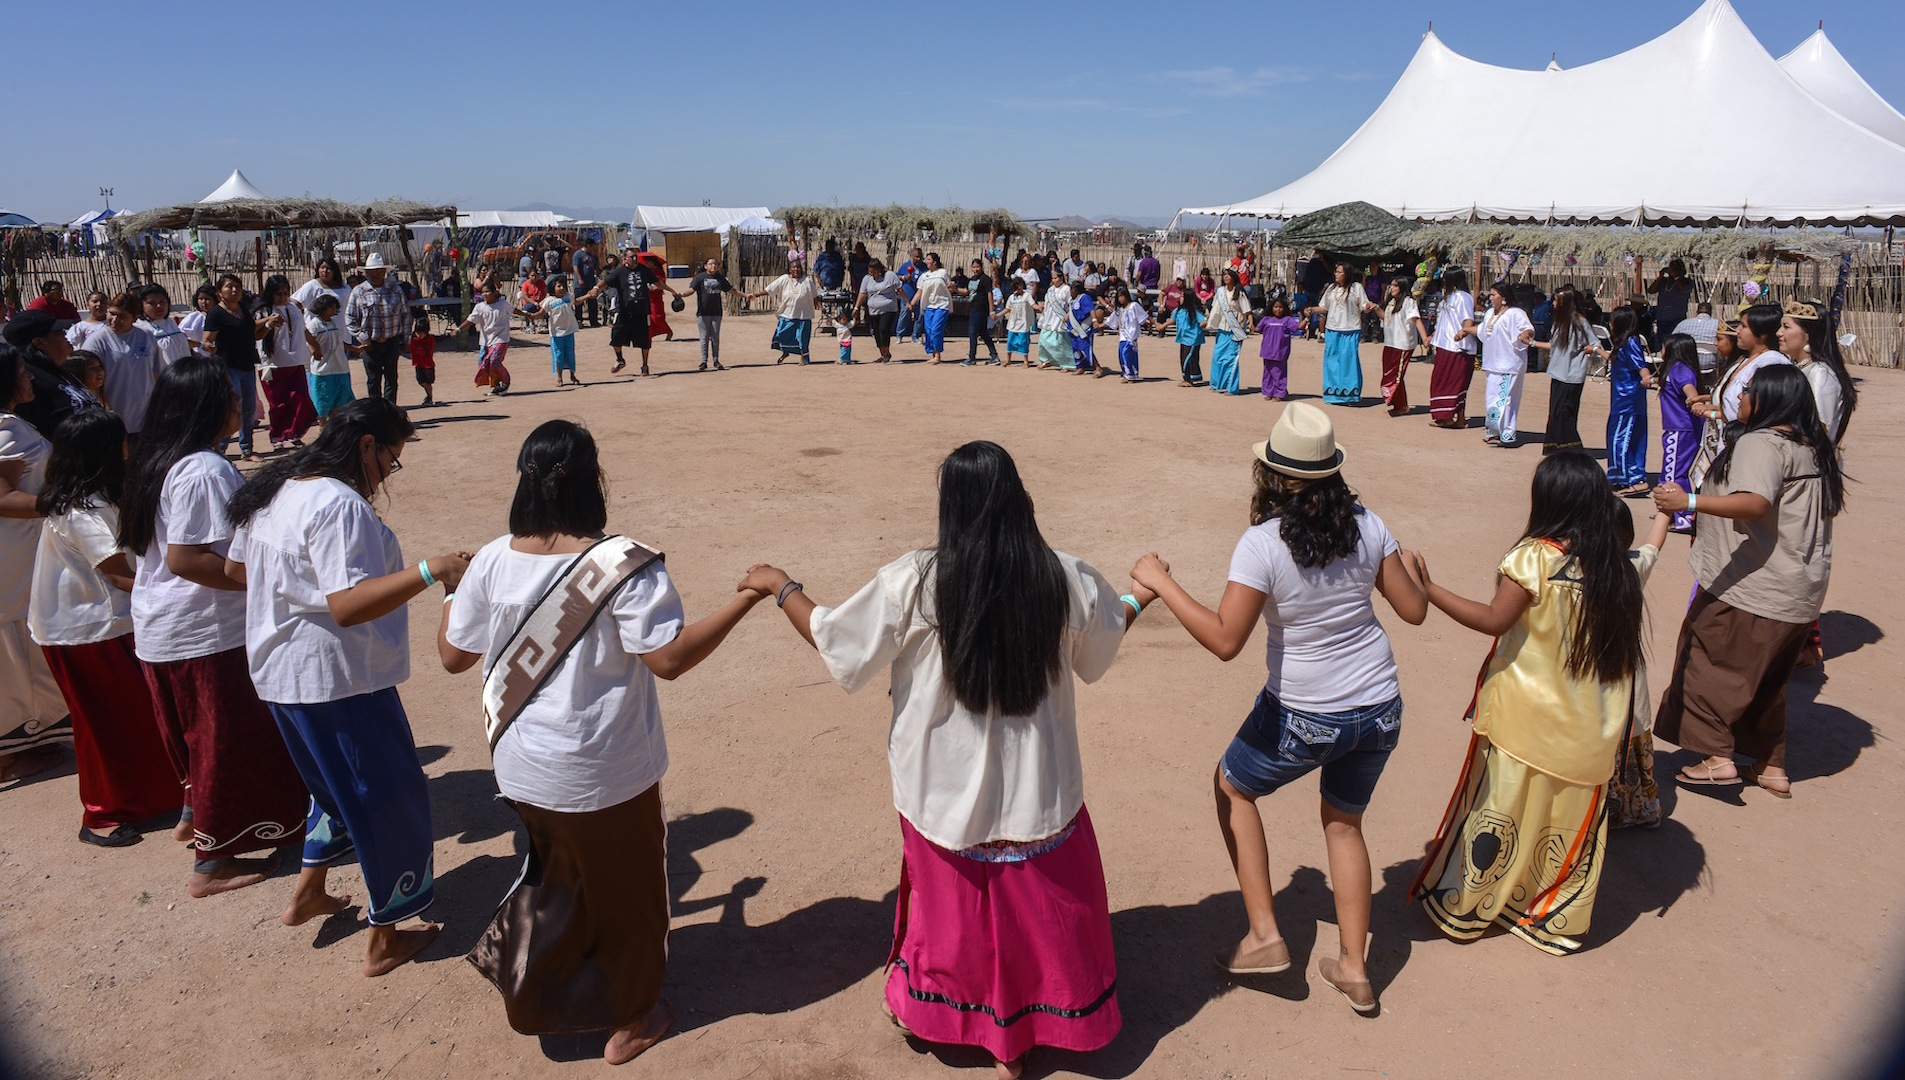 Dozens hold hands in a circle dance at a powwow on the Tohono O’Odham reservation.